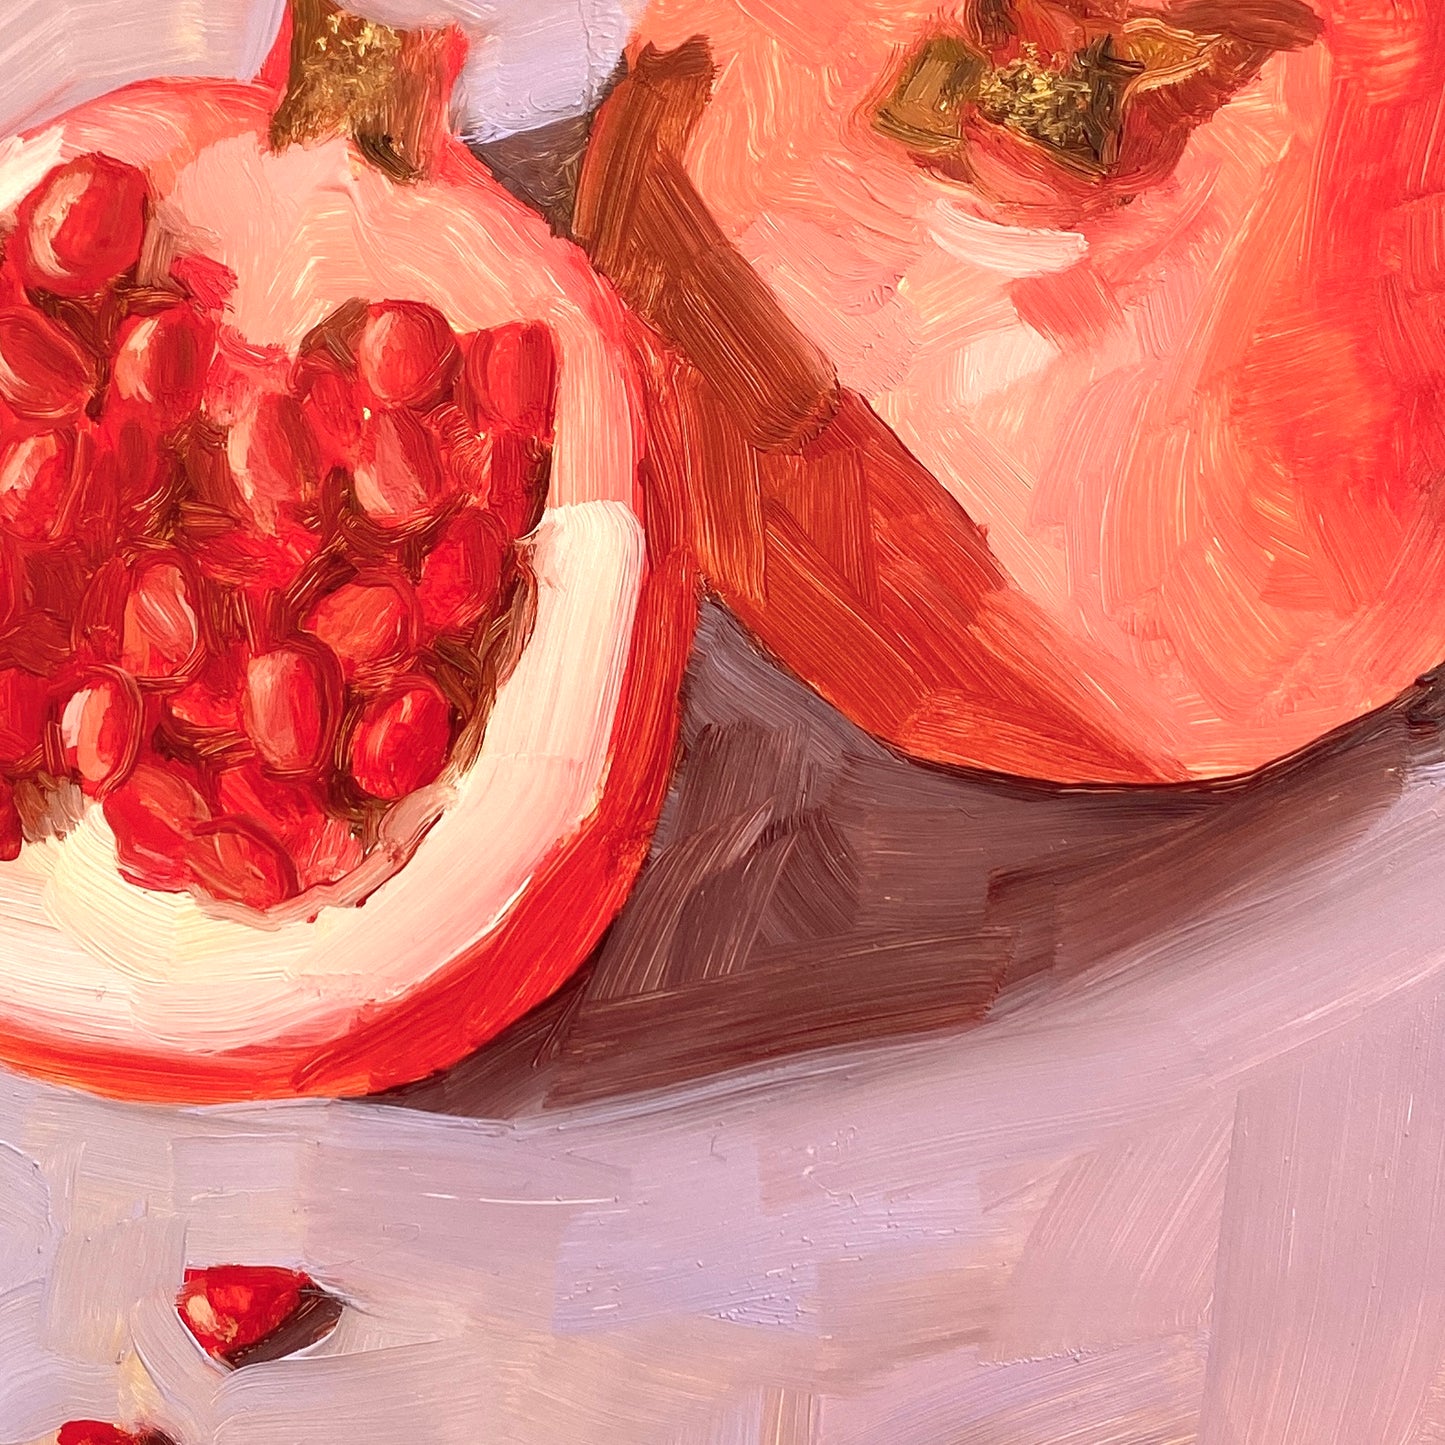 closeup of an original oil painting of a whole pomegranate and a cut pomegranate with seeds lying on a soft and smooth lilac background with bits of yellow showing through